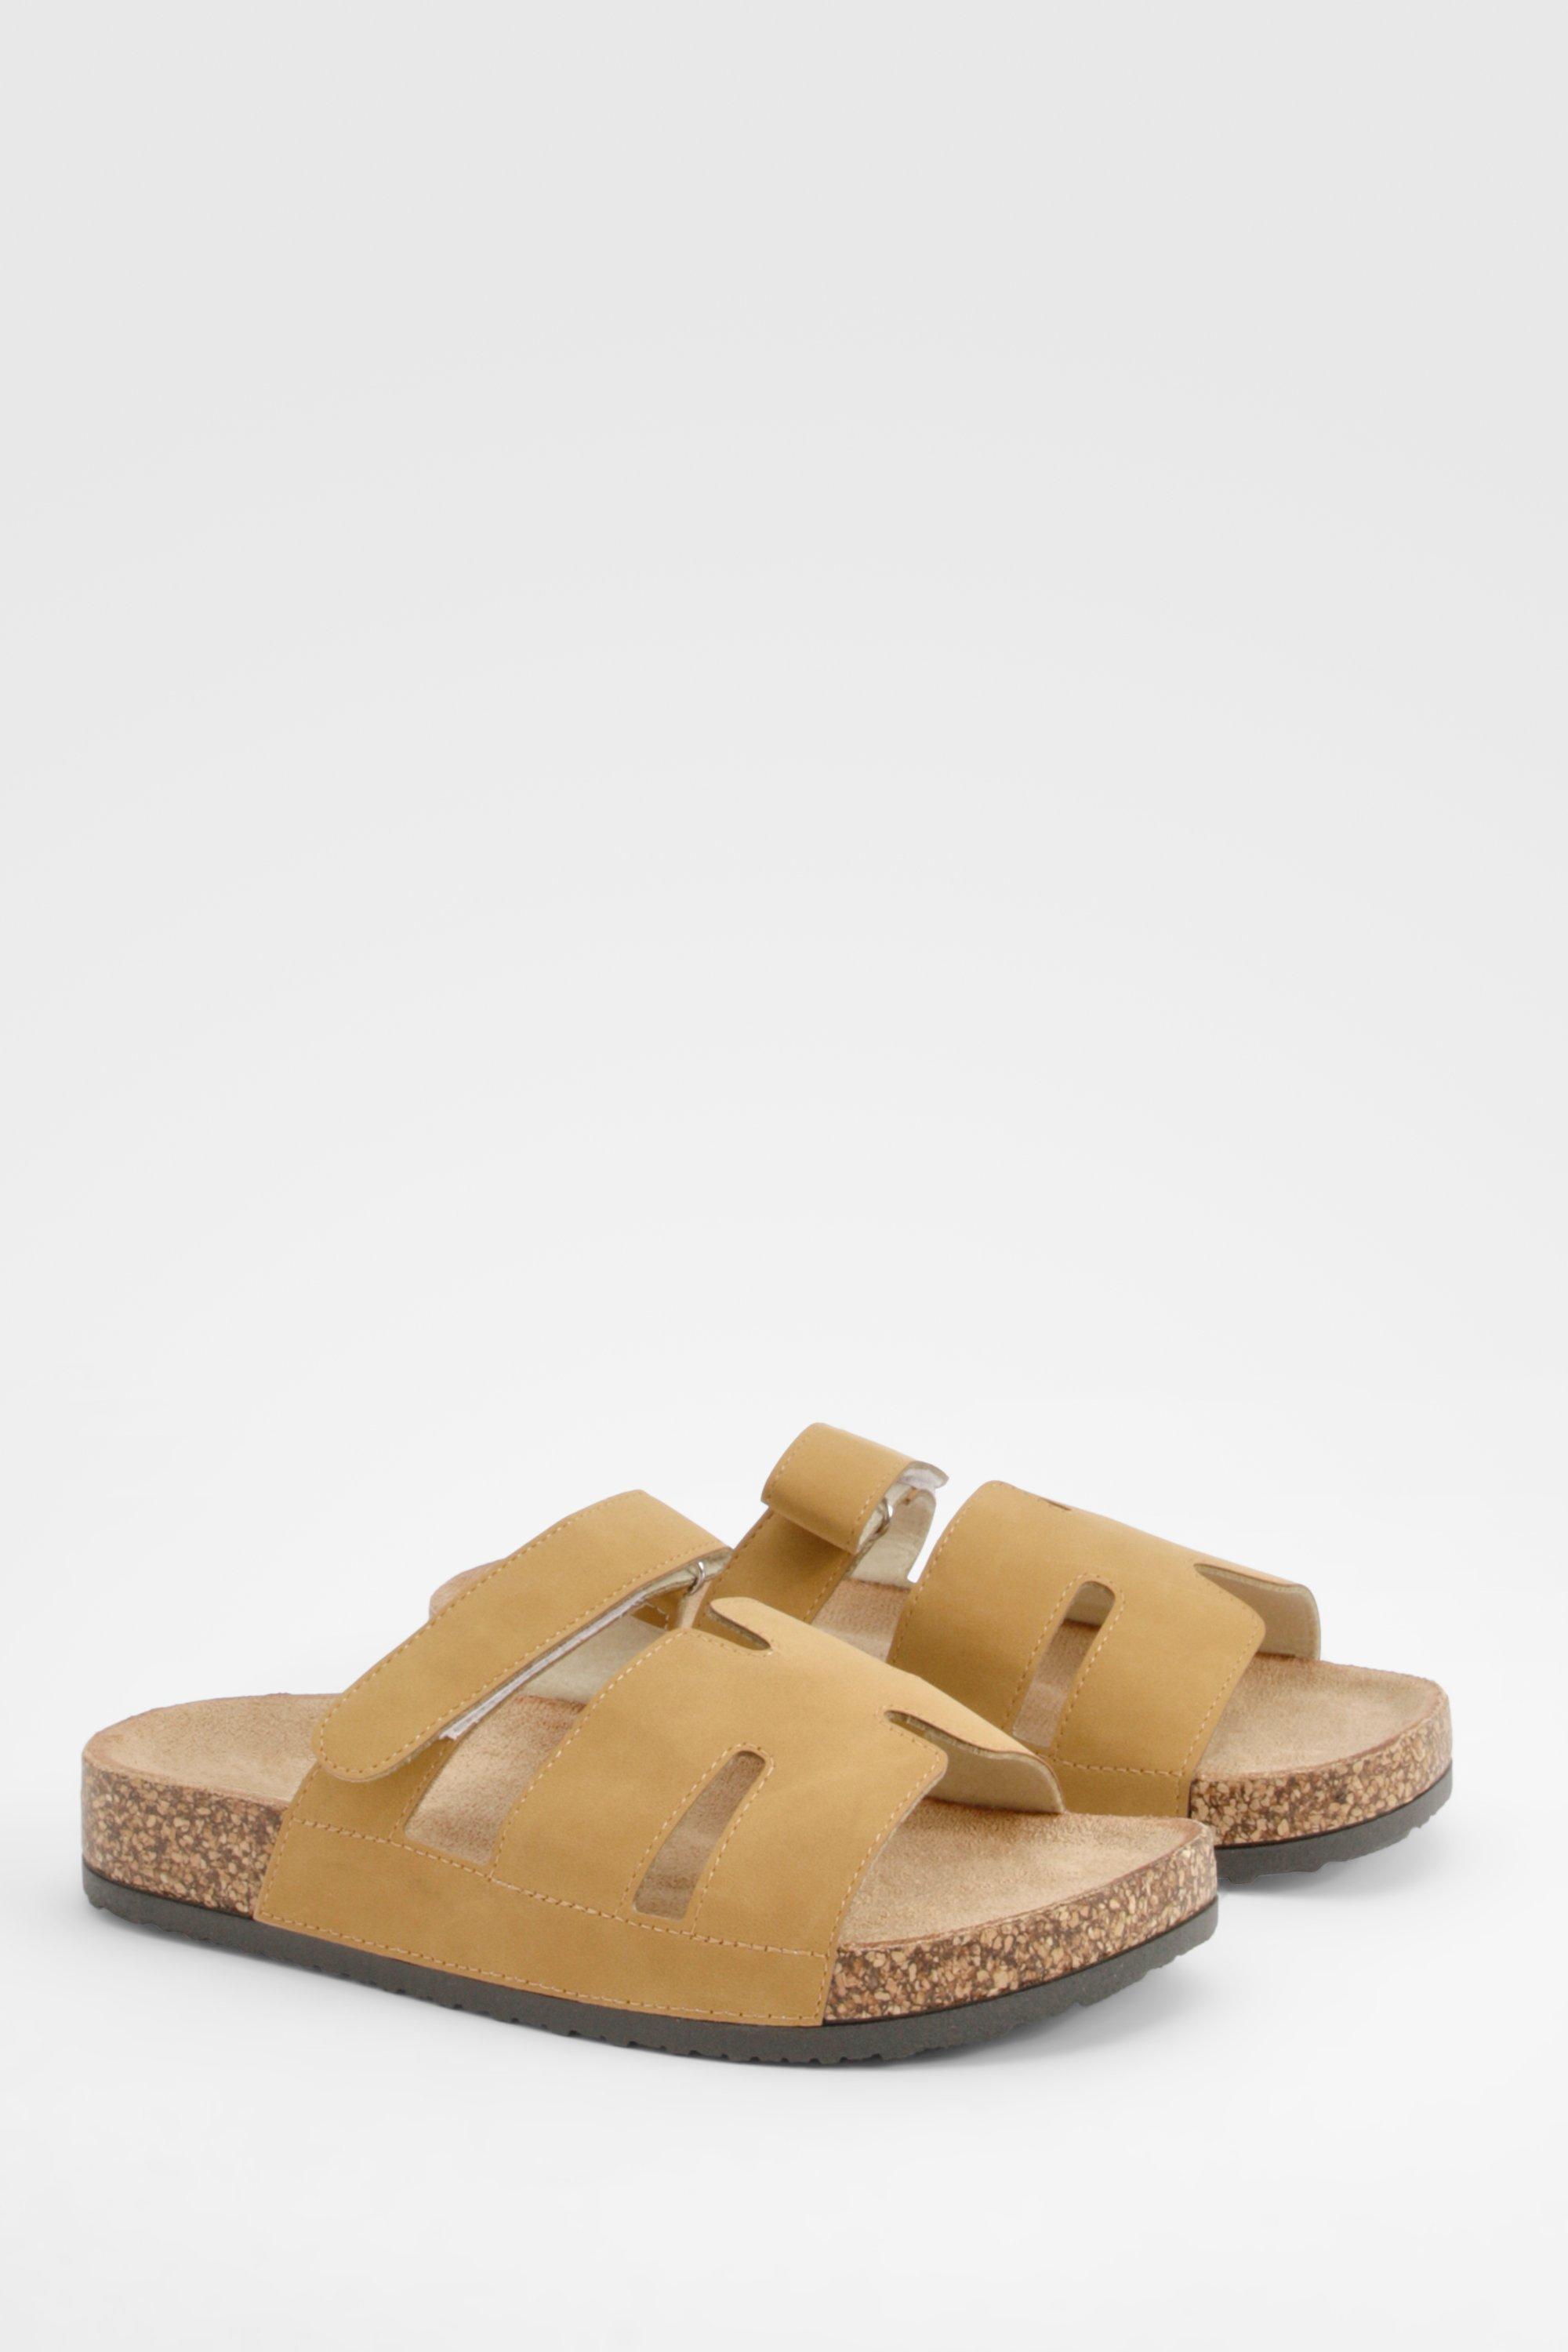 Image of Cut Out Strap Detail Sliders, Beige